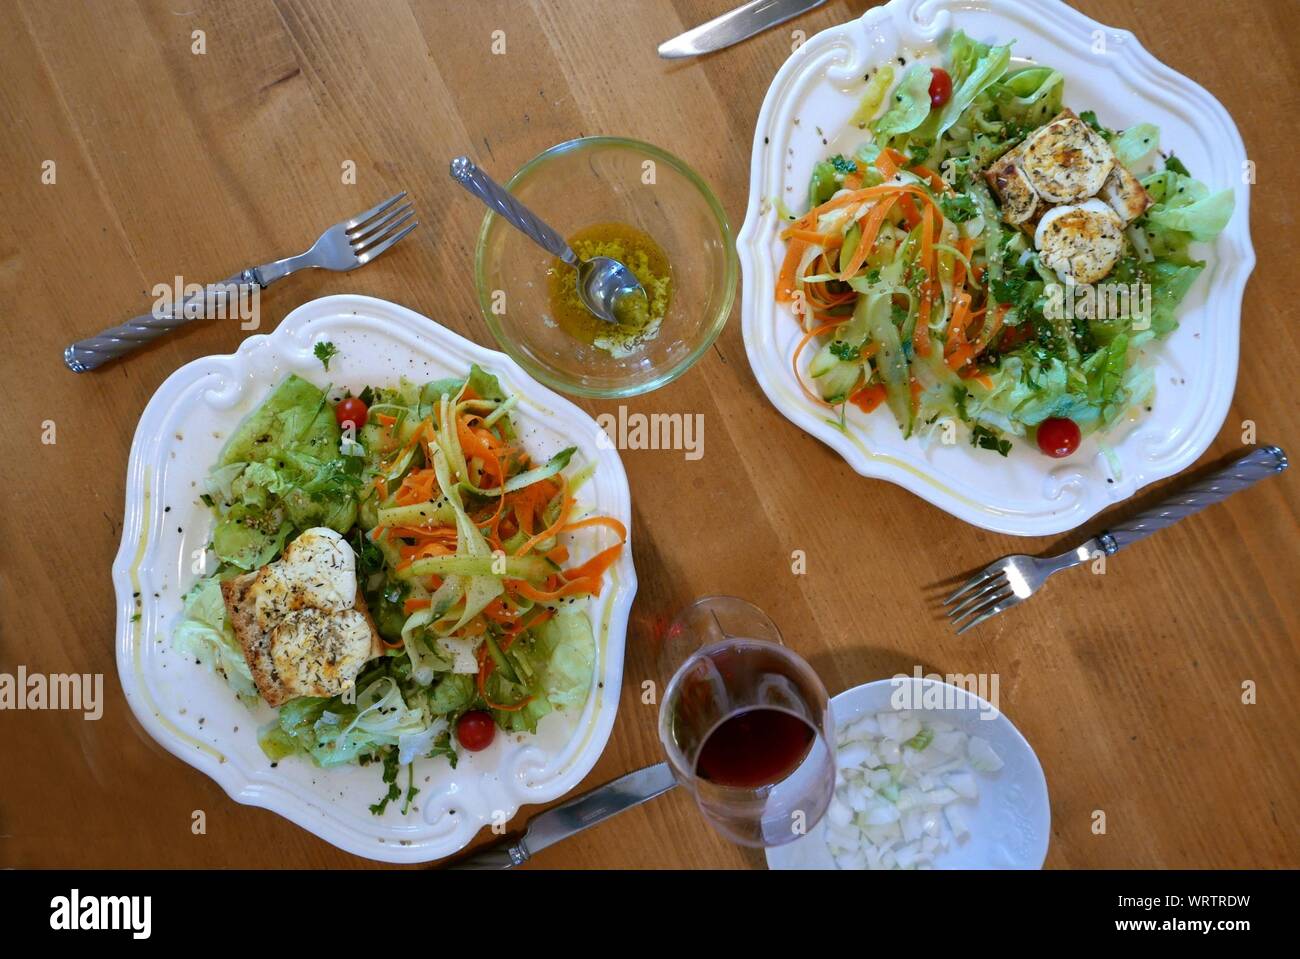 High Angle View Of Salads With Crouton And Wine On Table At Home Stock Photo